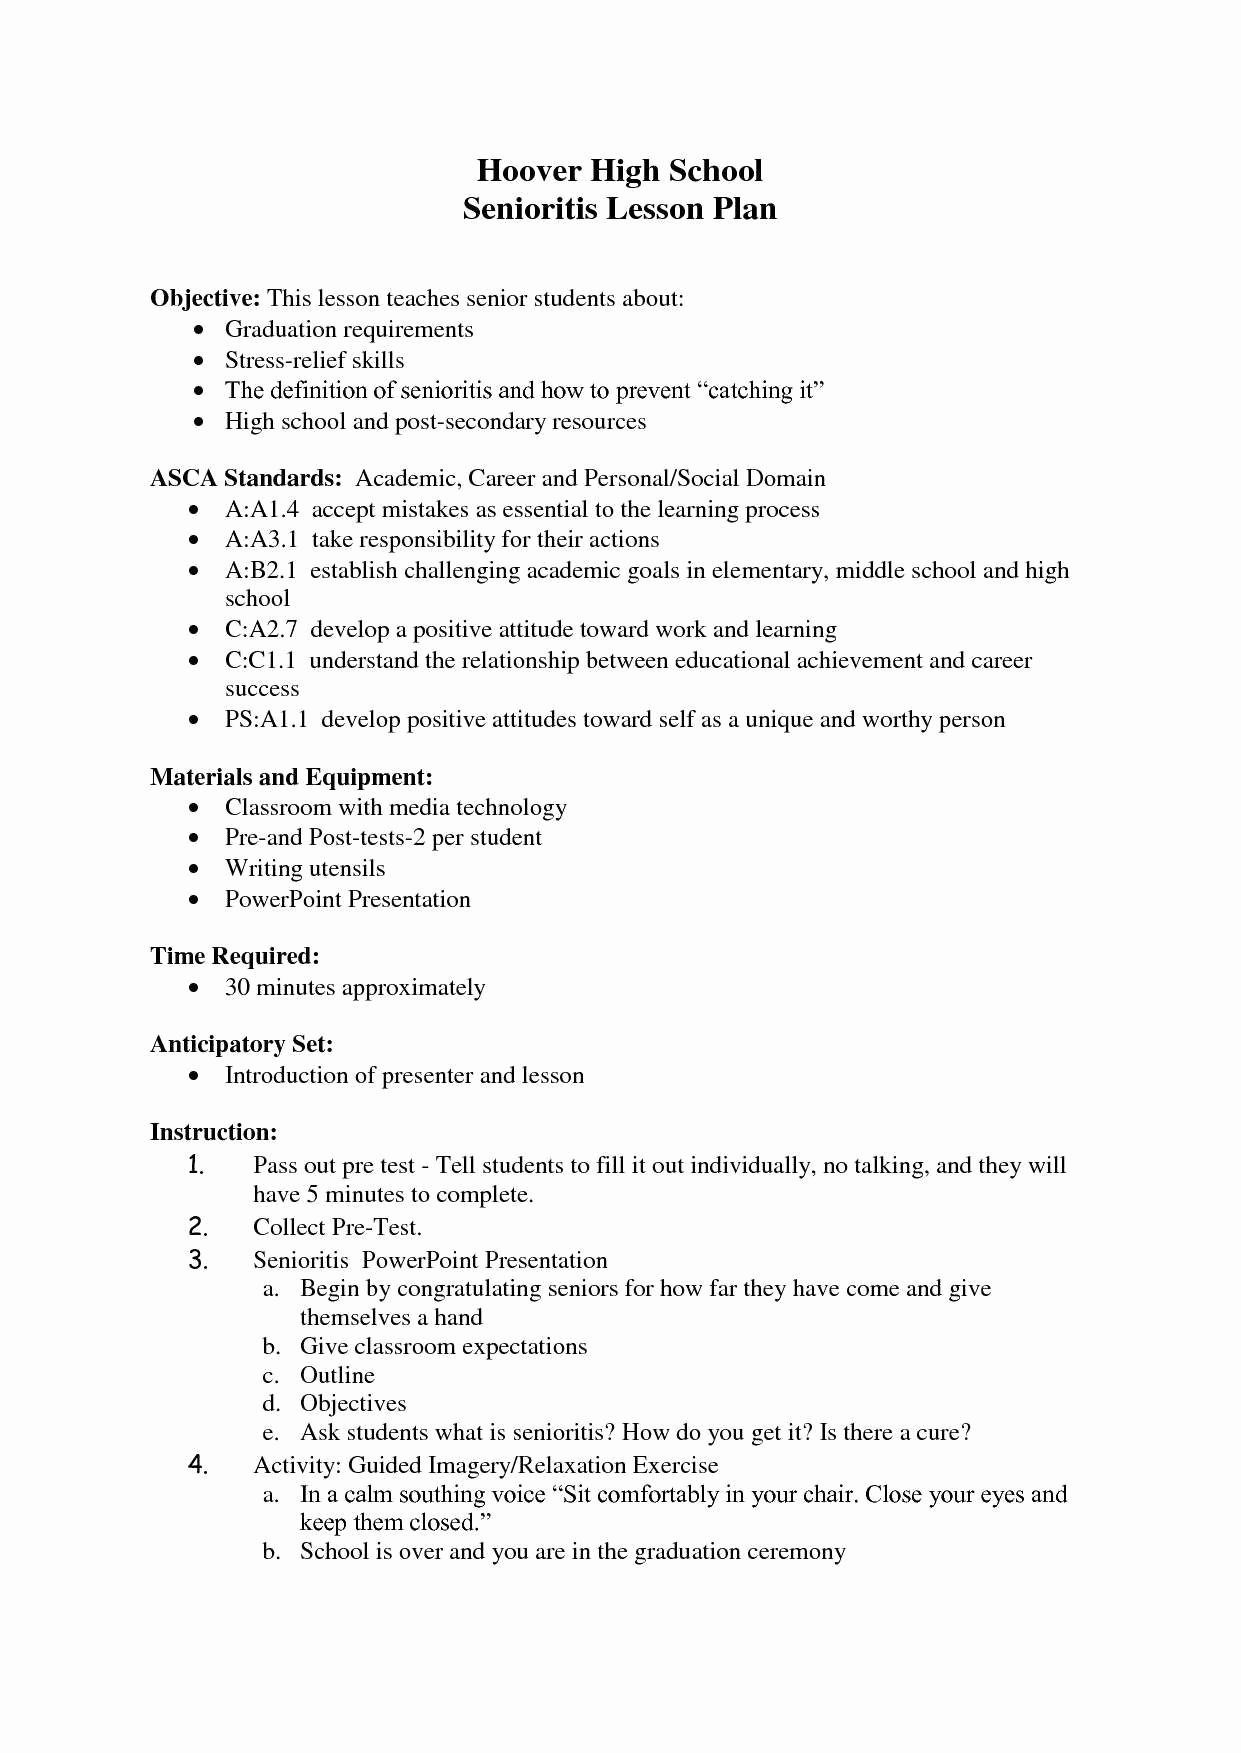 High School Student Resume High School Student Resume Objective Winning Resume Objective Statement Examples Glendale Munity Document Gallery high school student resume|wikiresume.com